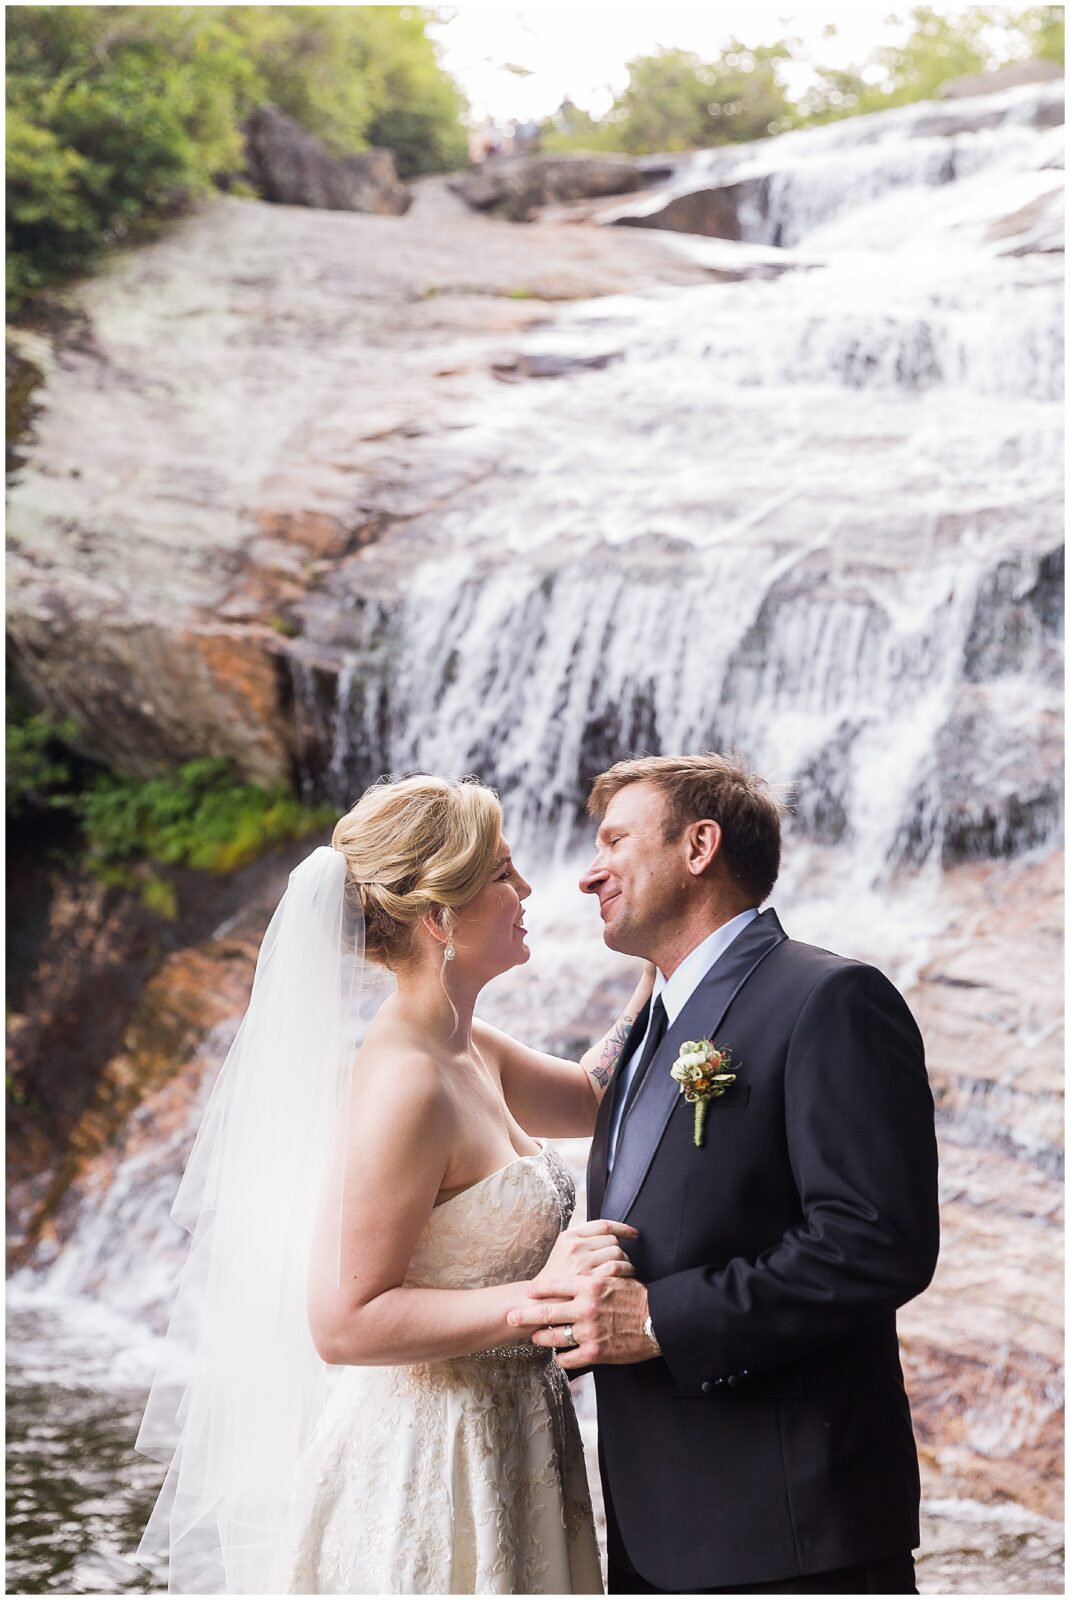 Waterfall Elopement in Asheville, NC